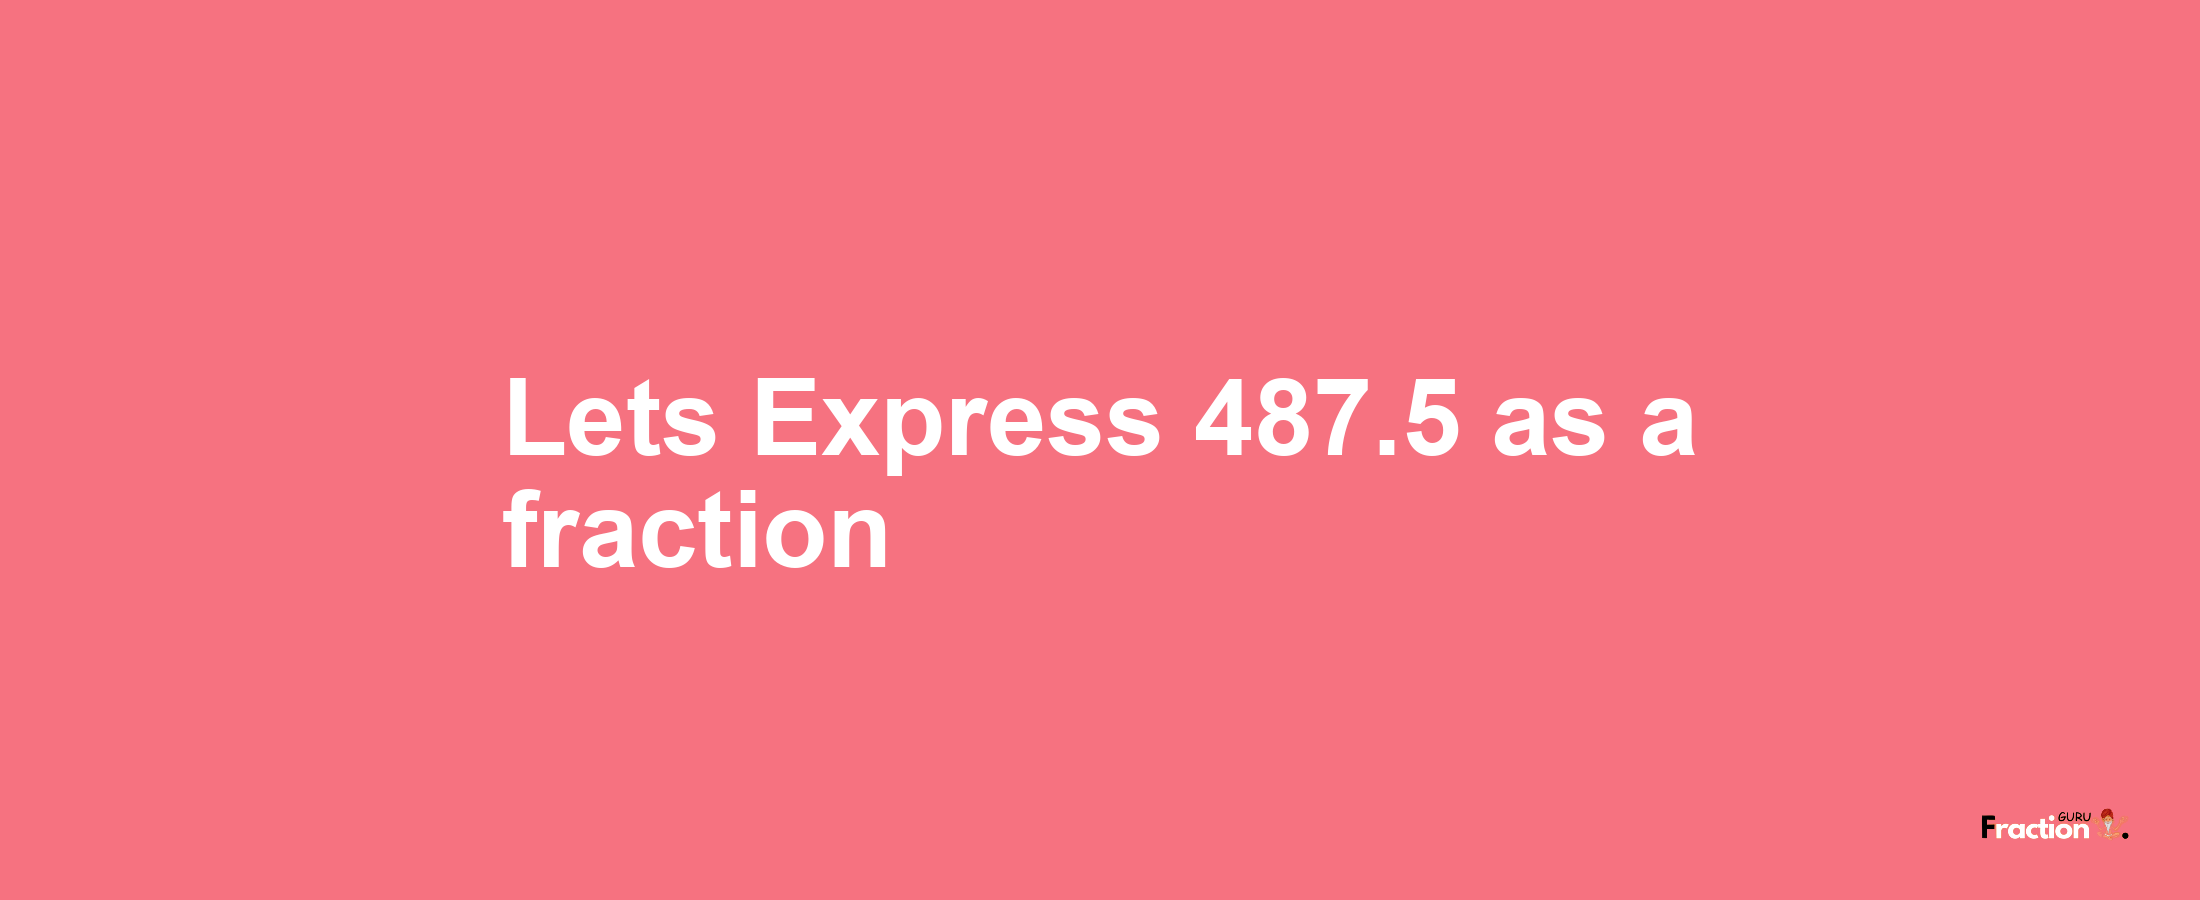 Lets Express 487.5 as afraction